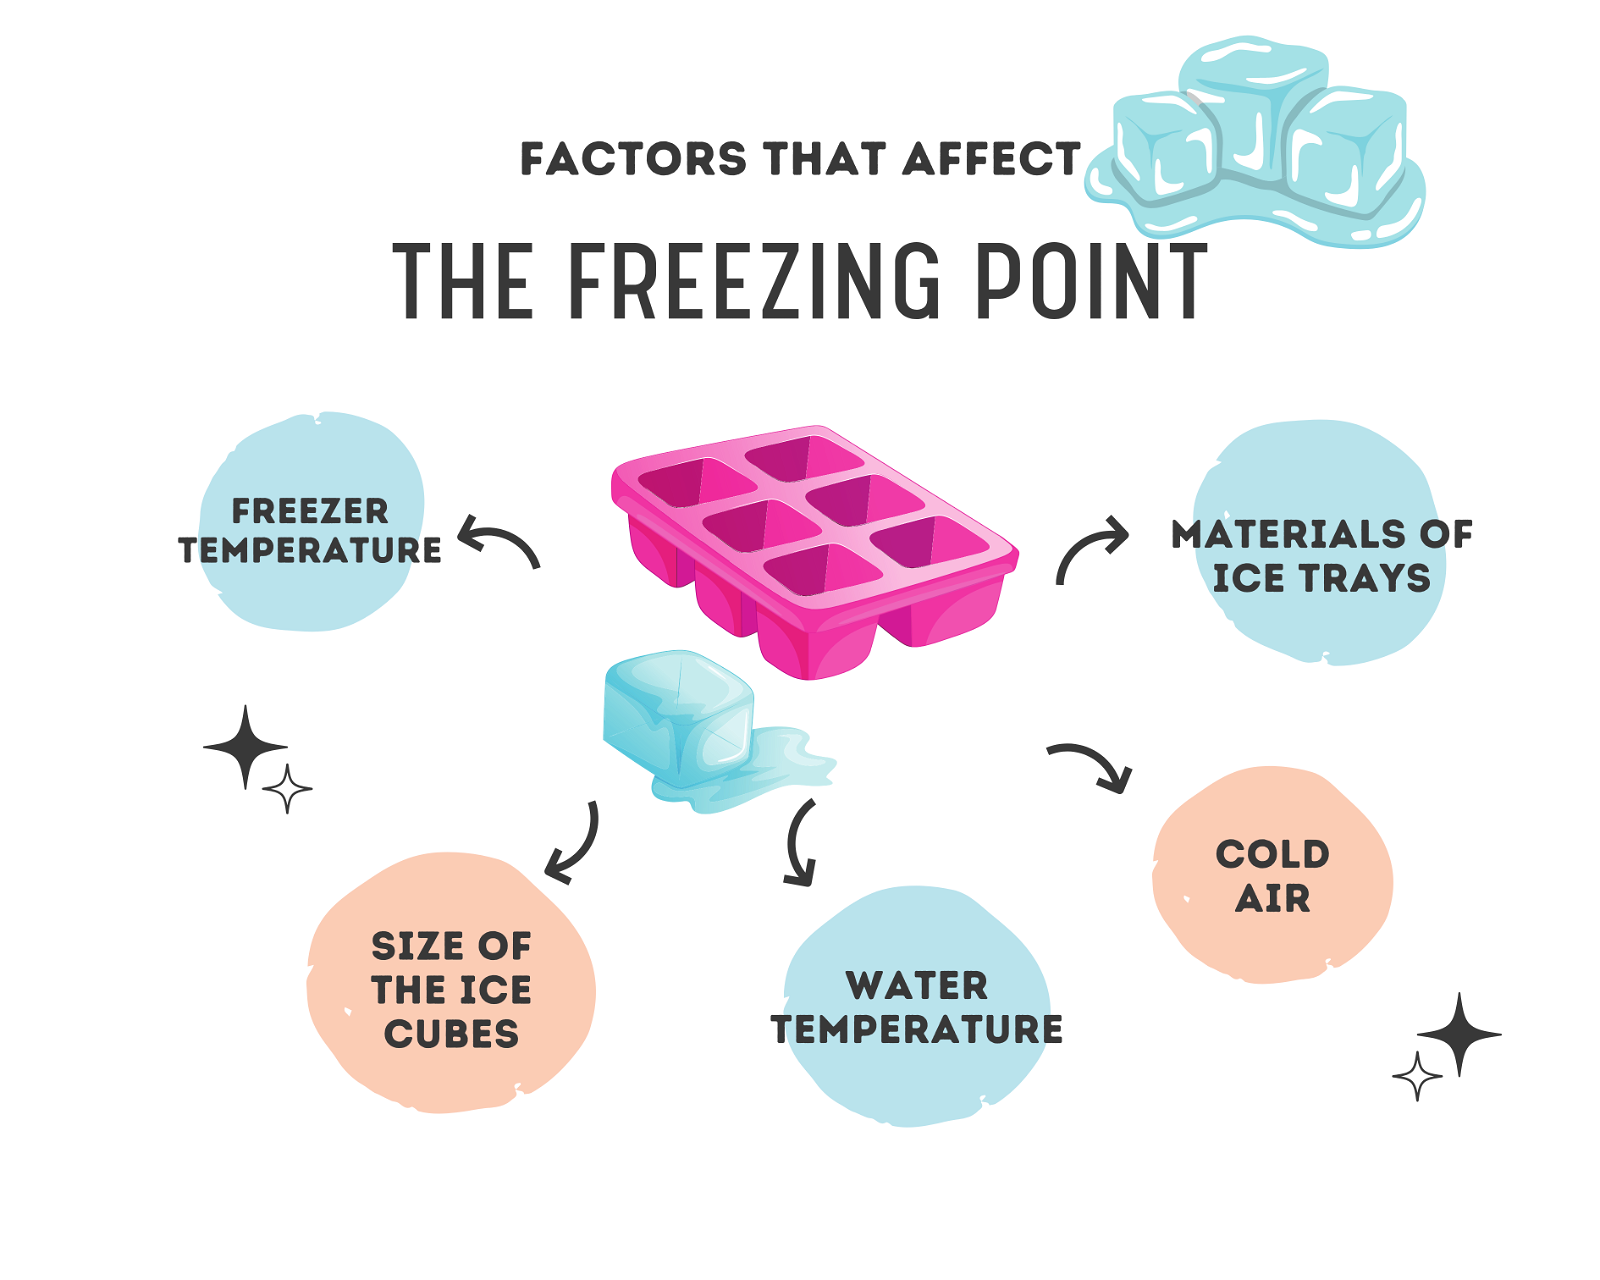 How Long Does It Take to Freeze Ice?